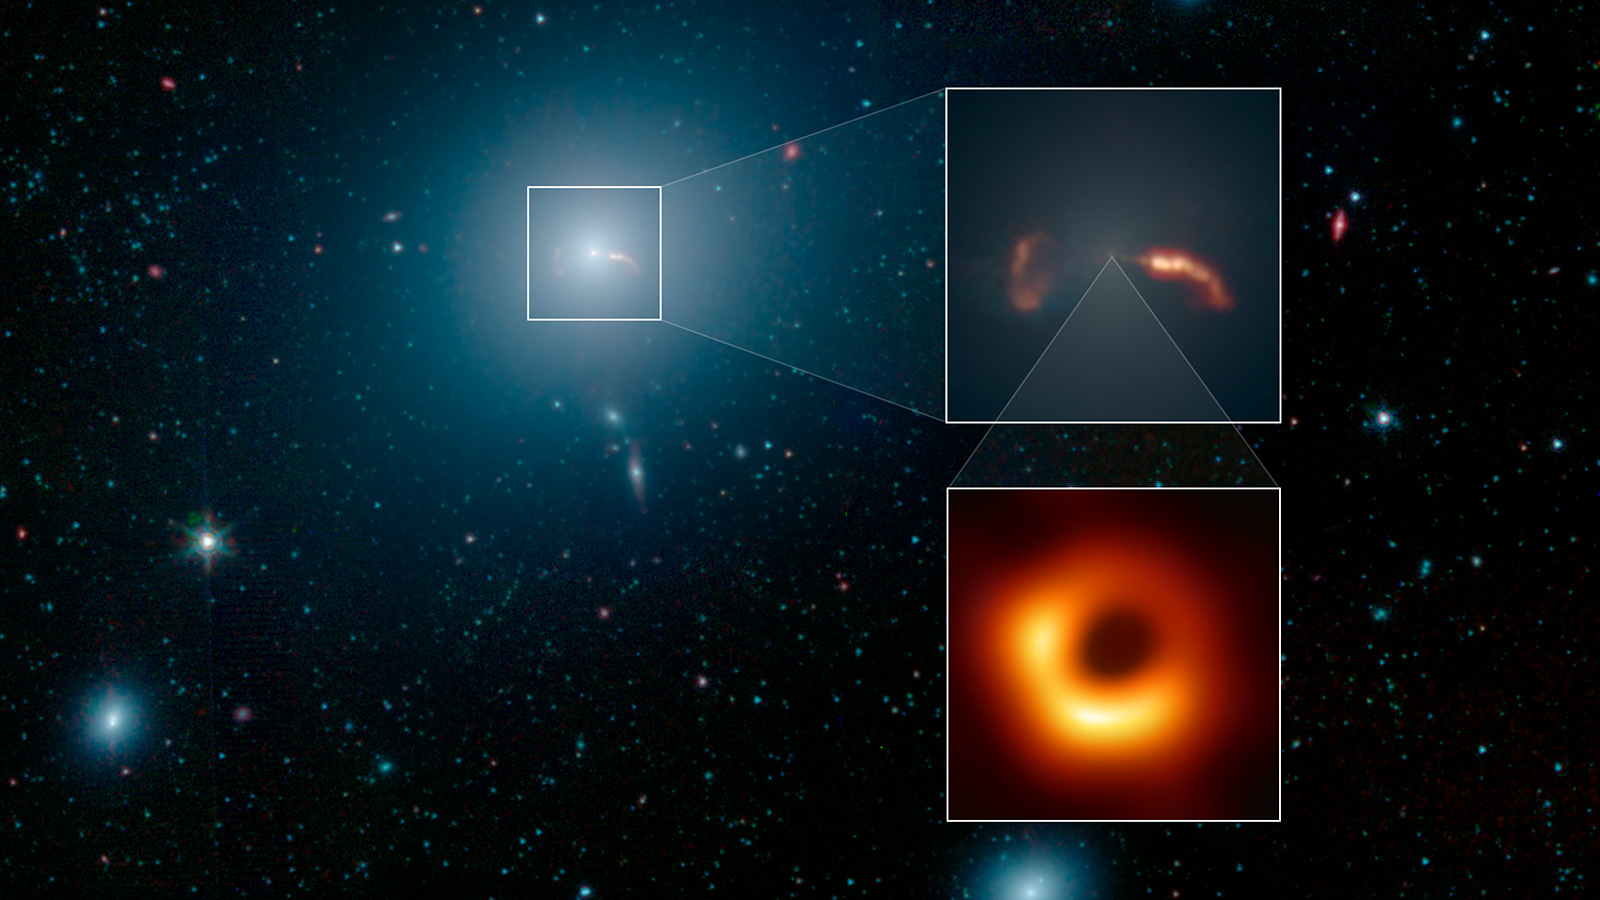 Scientists Believe They’ve Uncovered the Reason Behind the ‘Lightsaber’ Energy Jets Emanating from the First-Ever Imaged Black Hole, Surpassing the Size of the Milky Way.